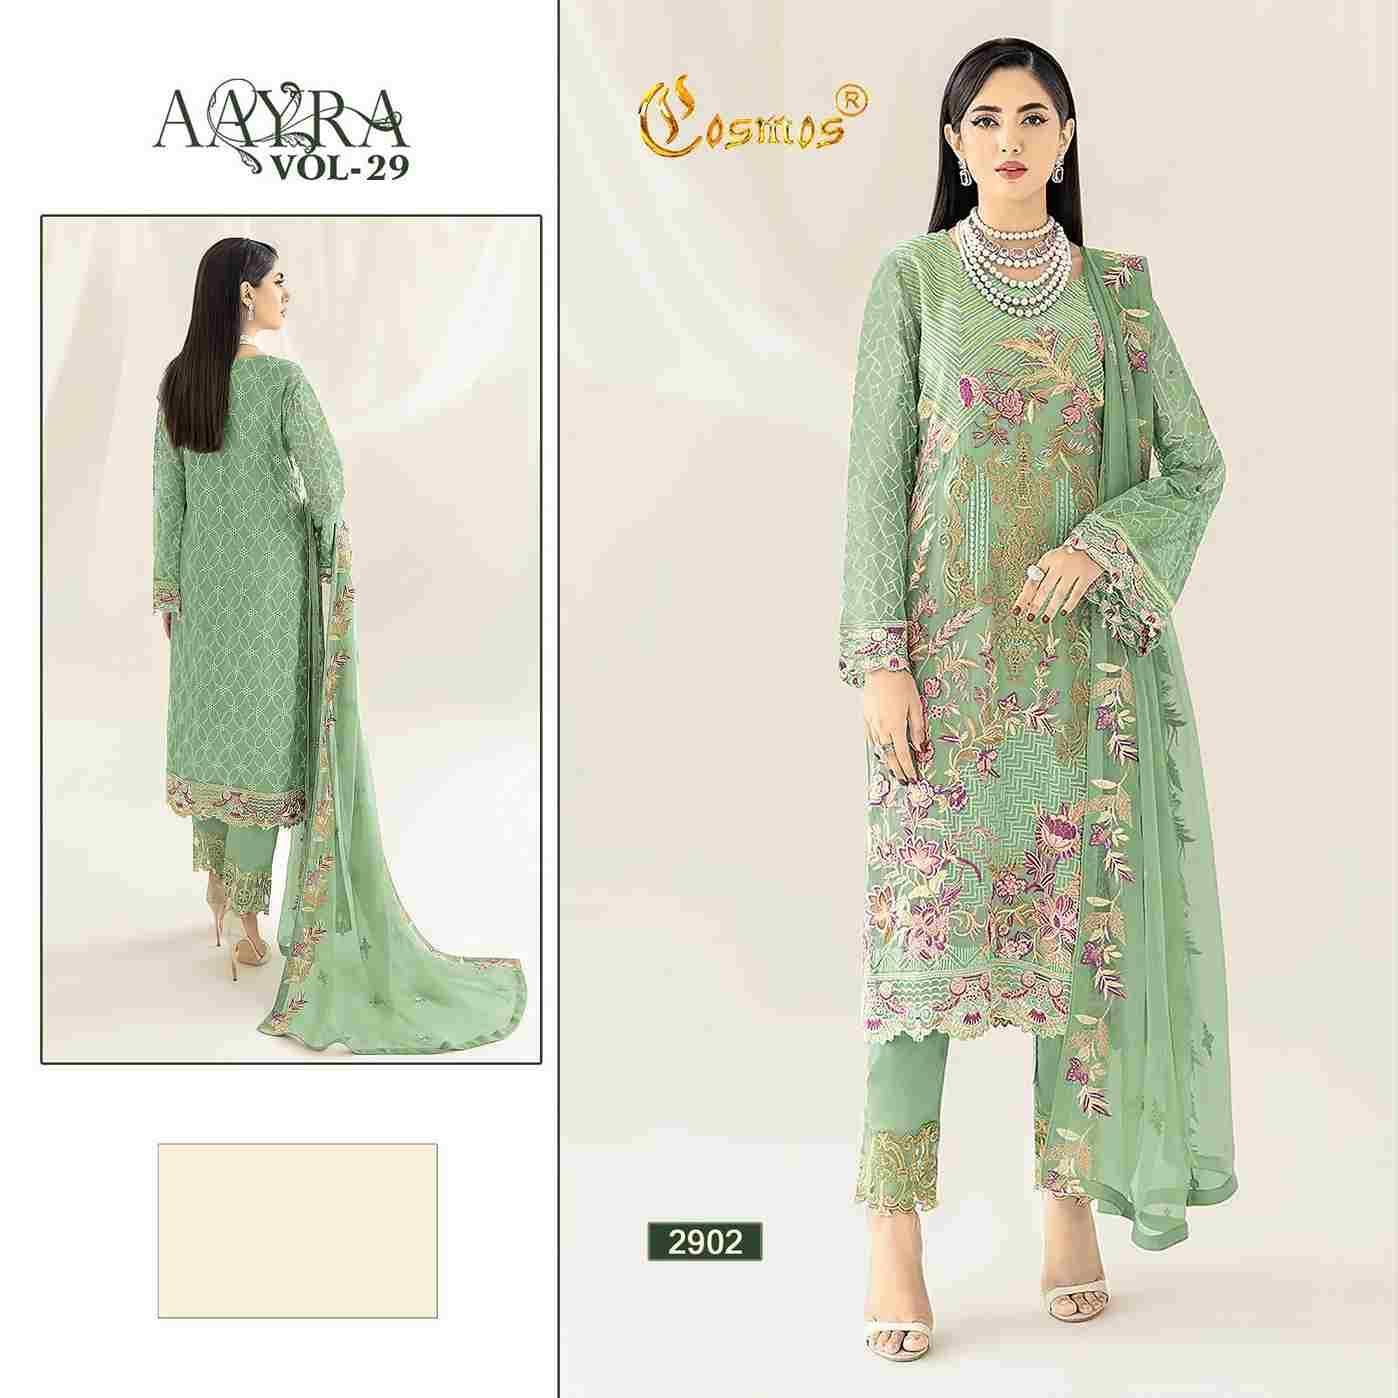 Aayra Vol-29 By Cosmos 2901 To 2905 Series Beautiful Pakistani Suits Colorful Stylish Fancy Casual Wear & Ethnic Wear Faux Georgette Dresses At Wholesale Price